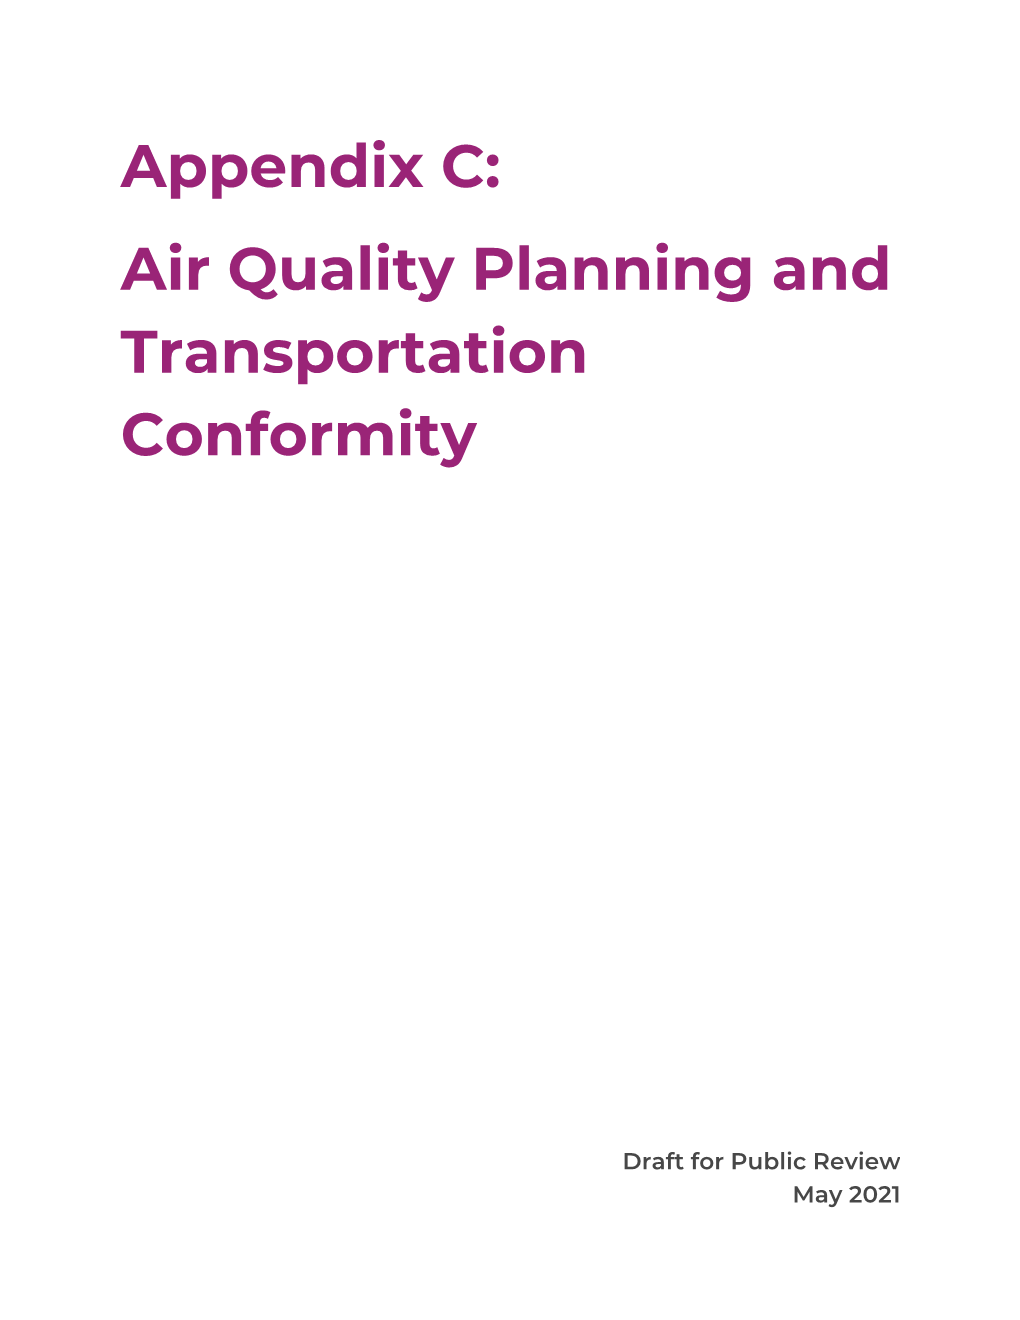 Air Quality Planning and Transportation Conformity